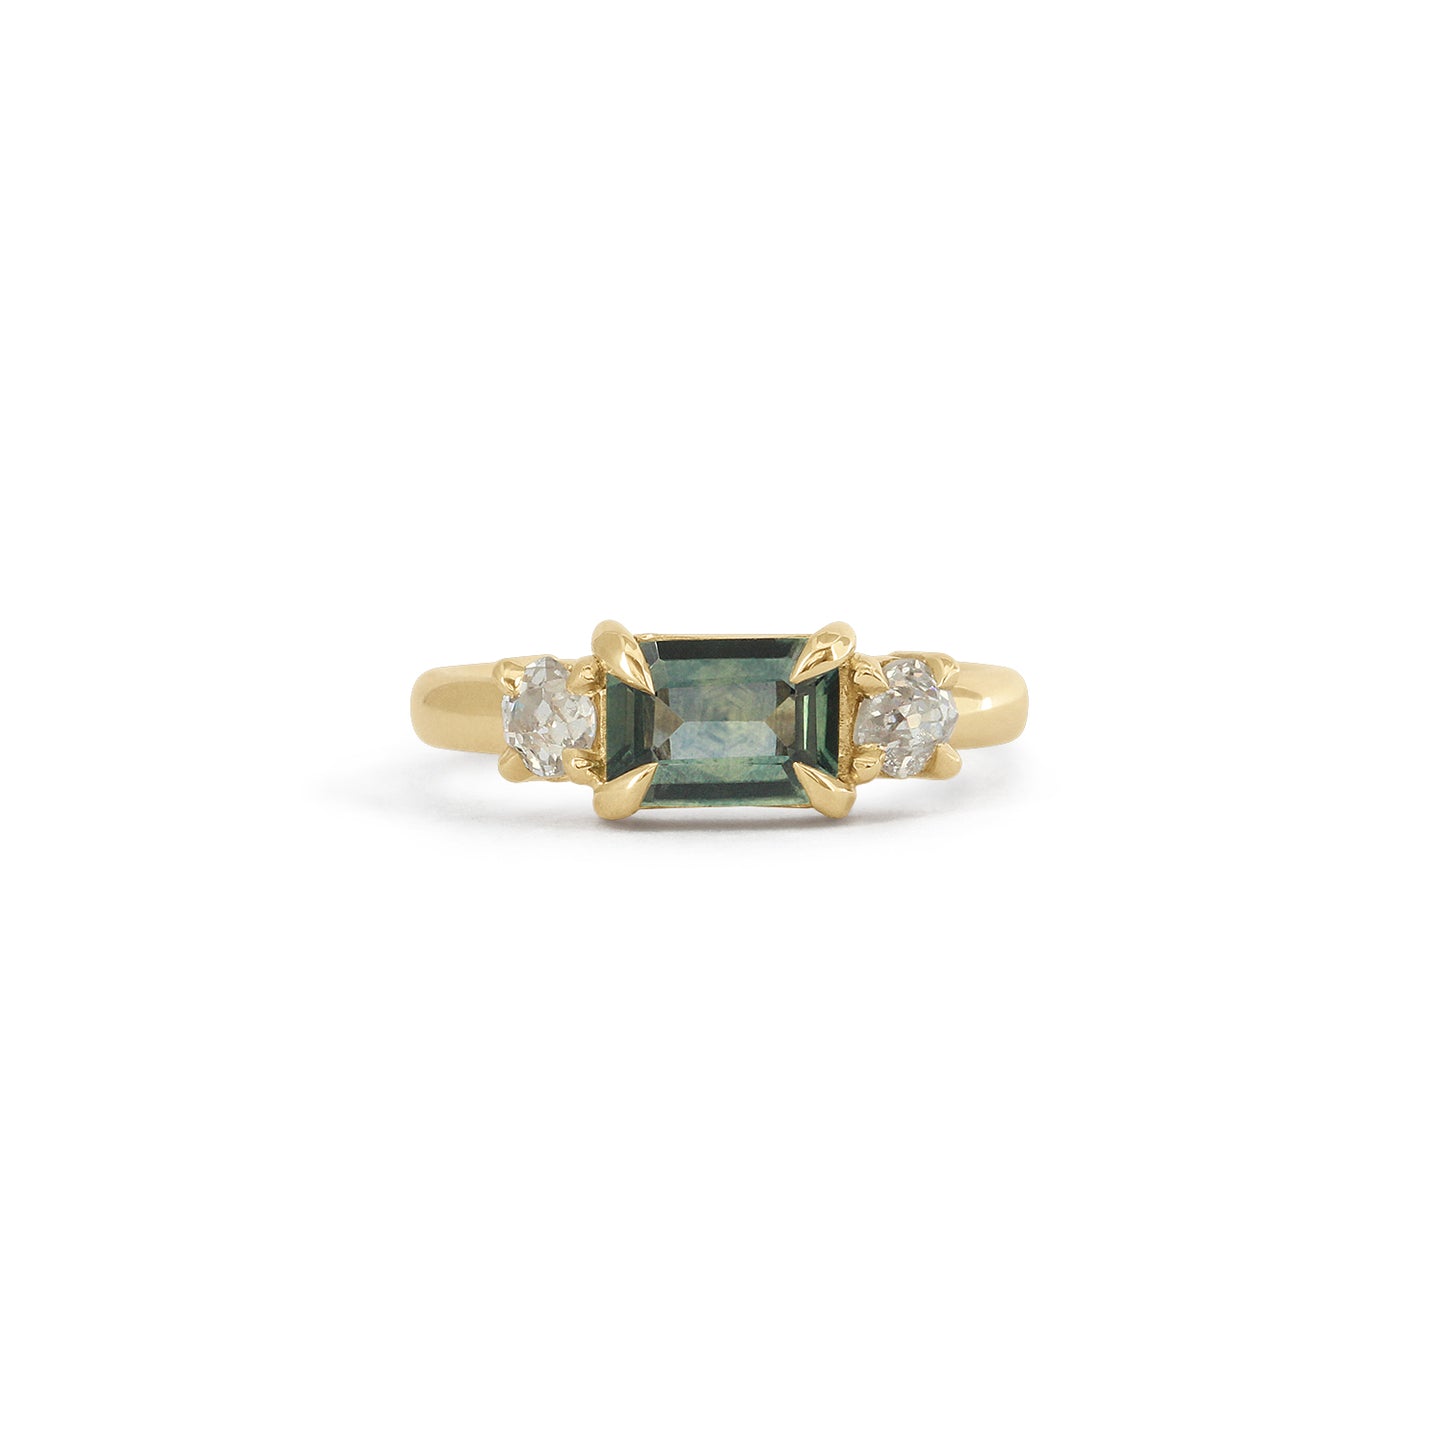 Ellipse Ring / Emerald Cut Green Sapphire + Old Mine Diamonds by Goldpoint